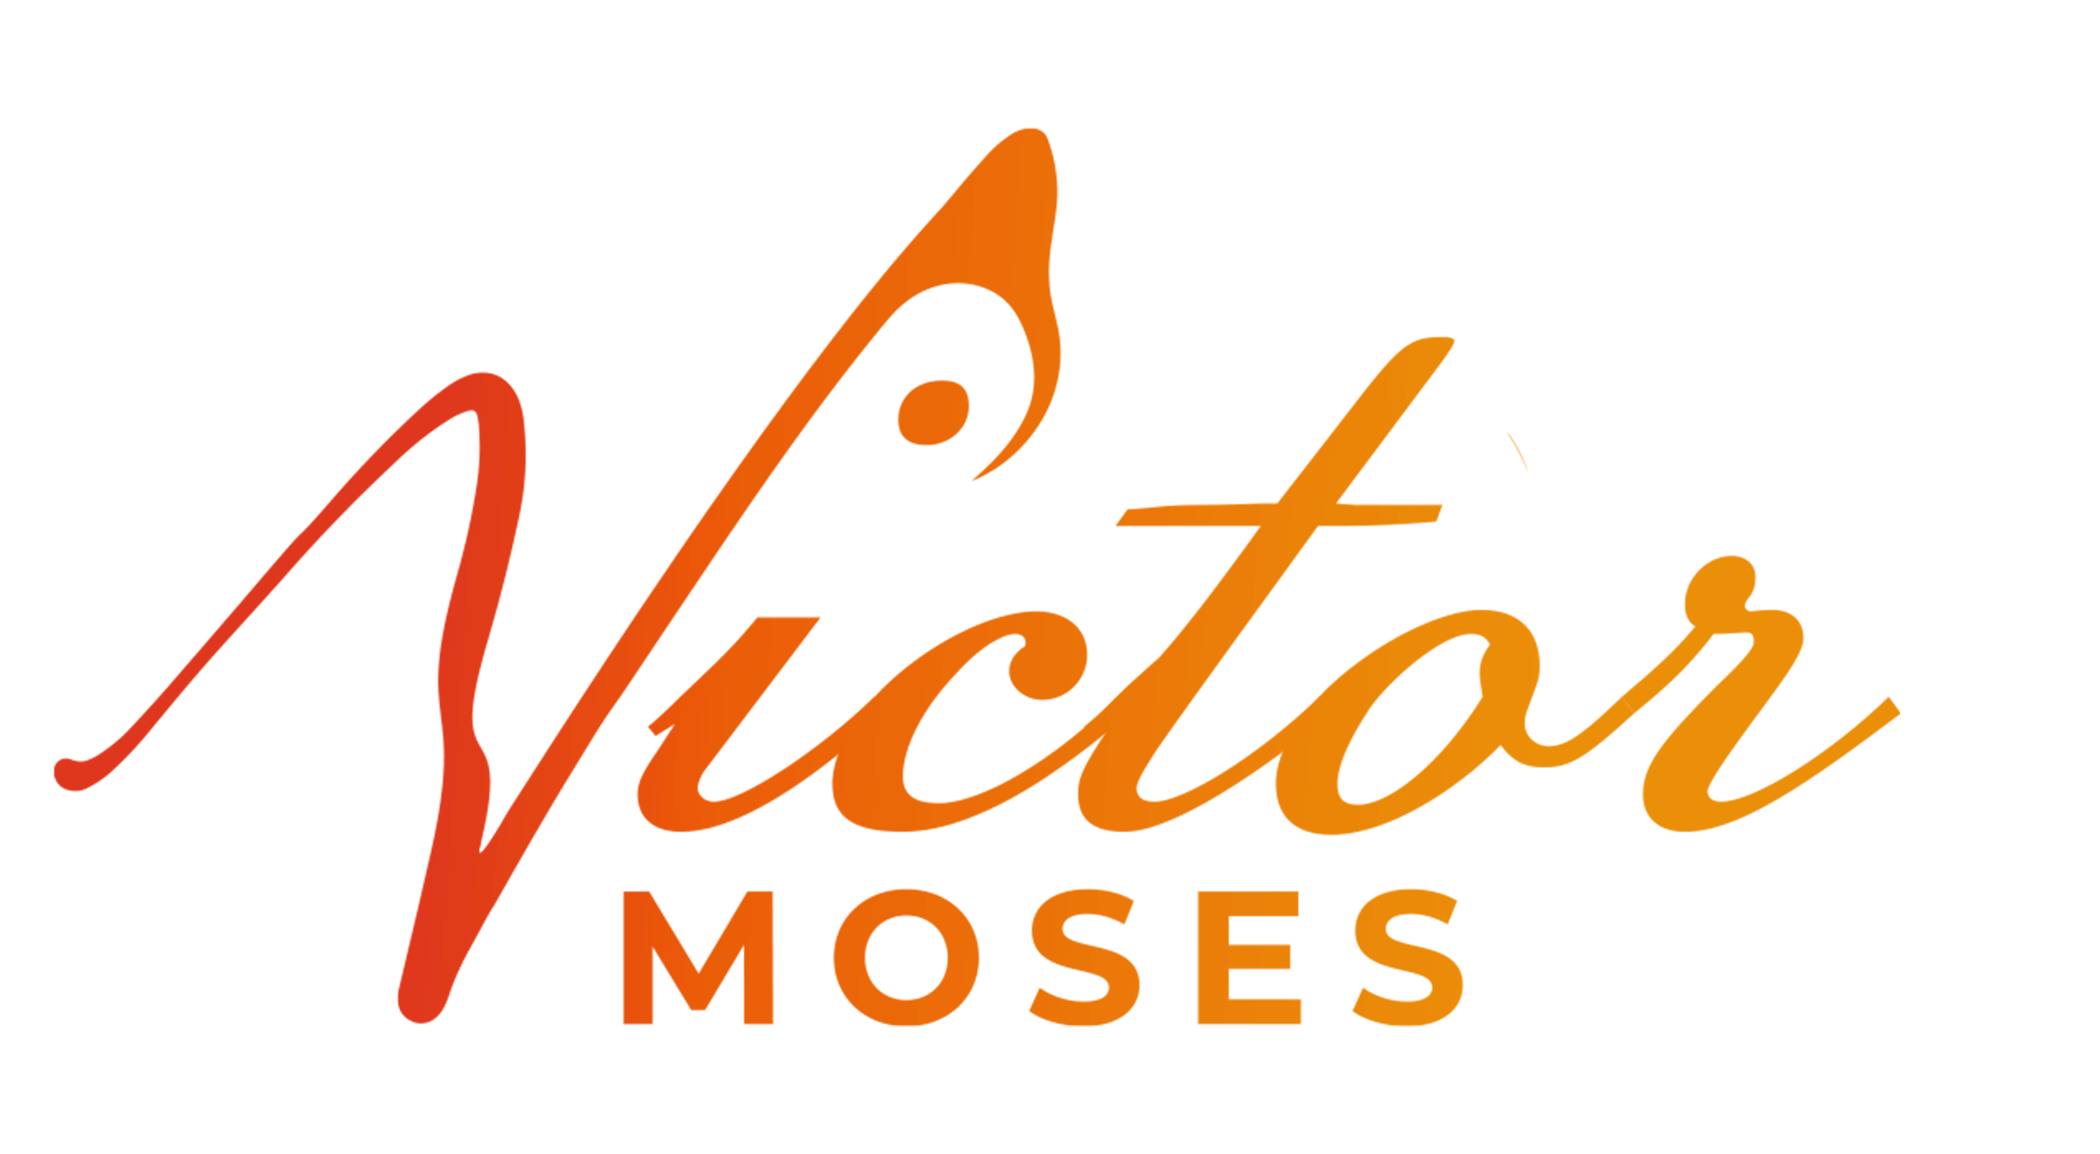 Victor Moses Music - Singer, Songwriter and Saxophonist